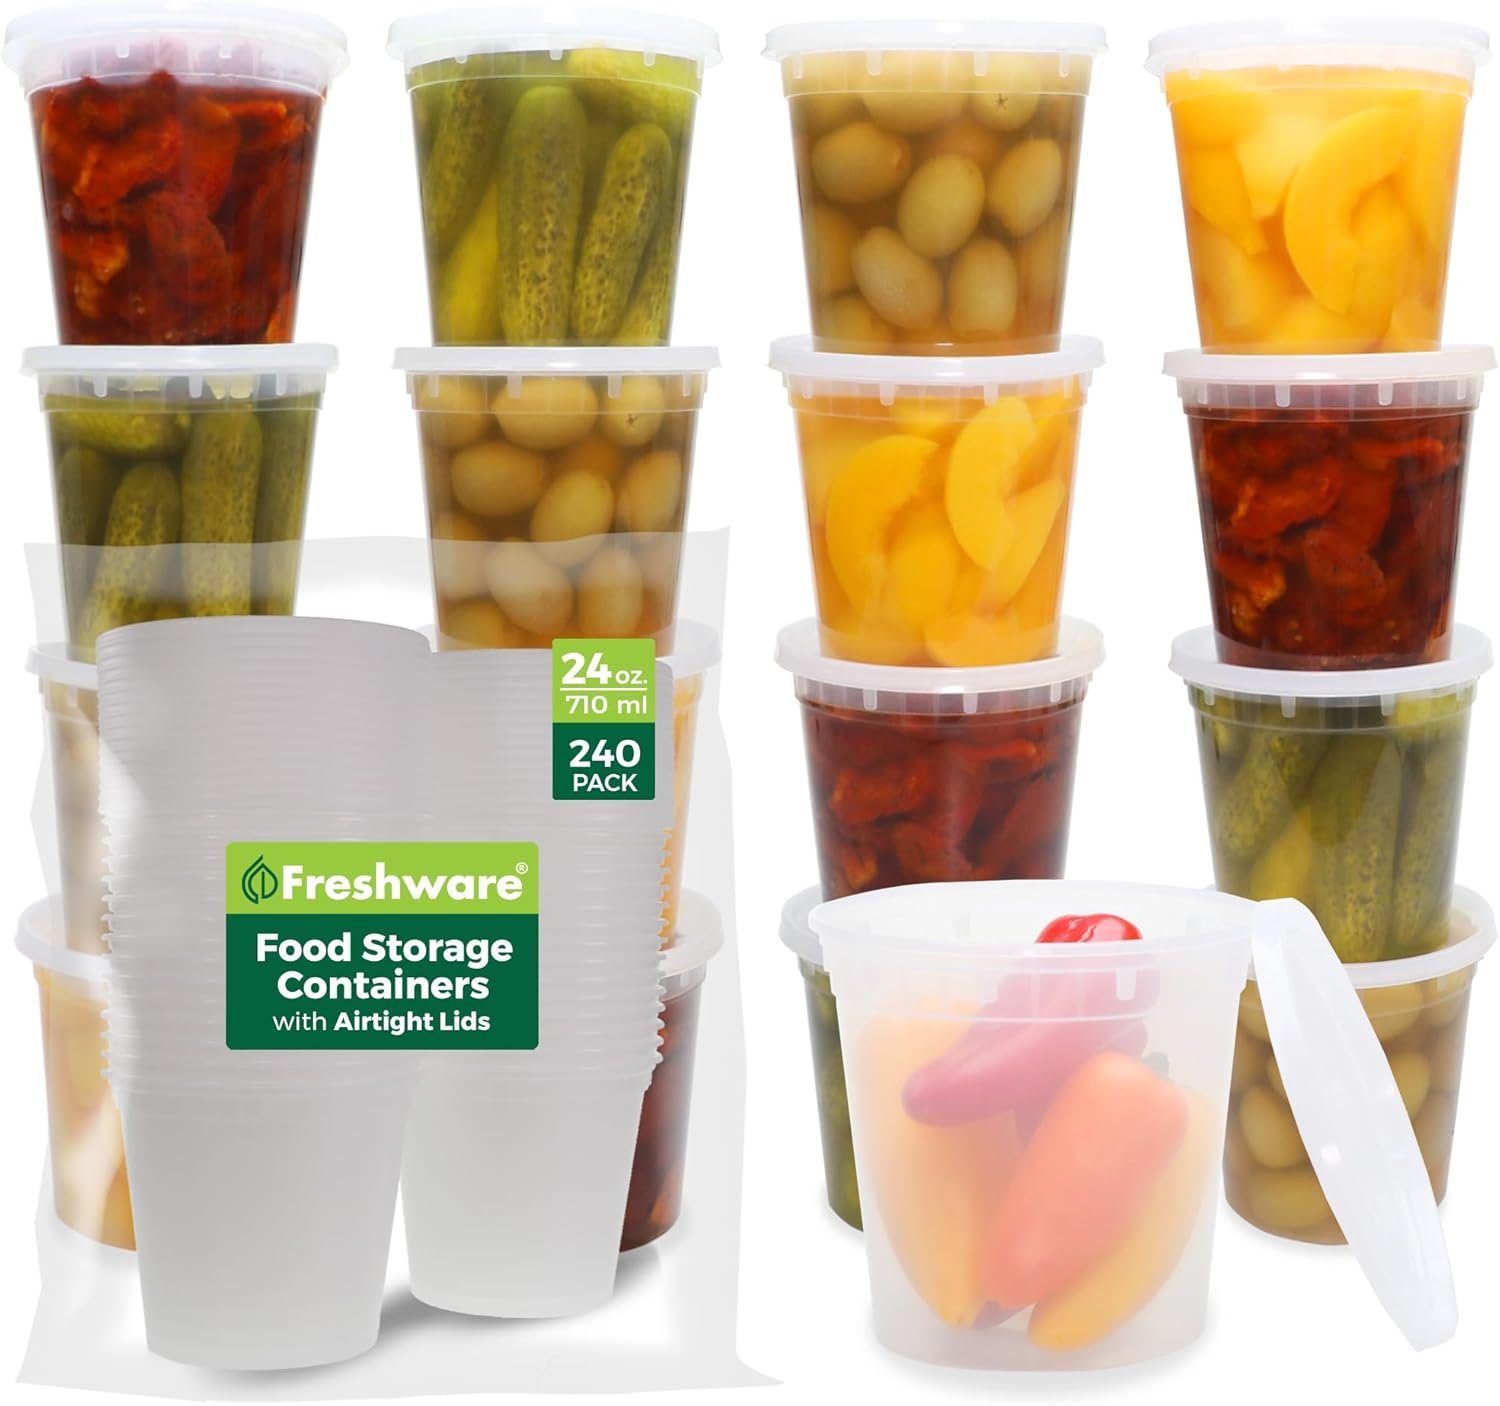 Freshware Food Storage Containers Review